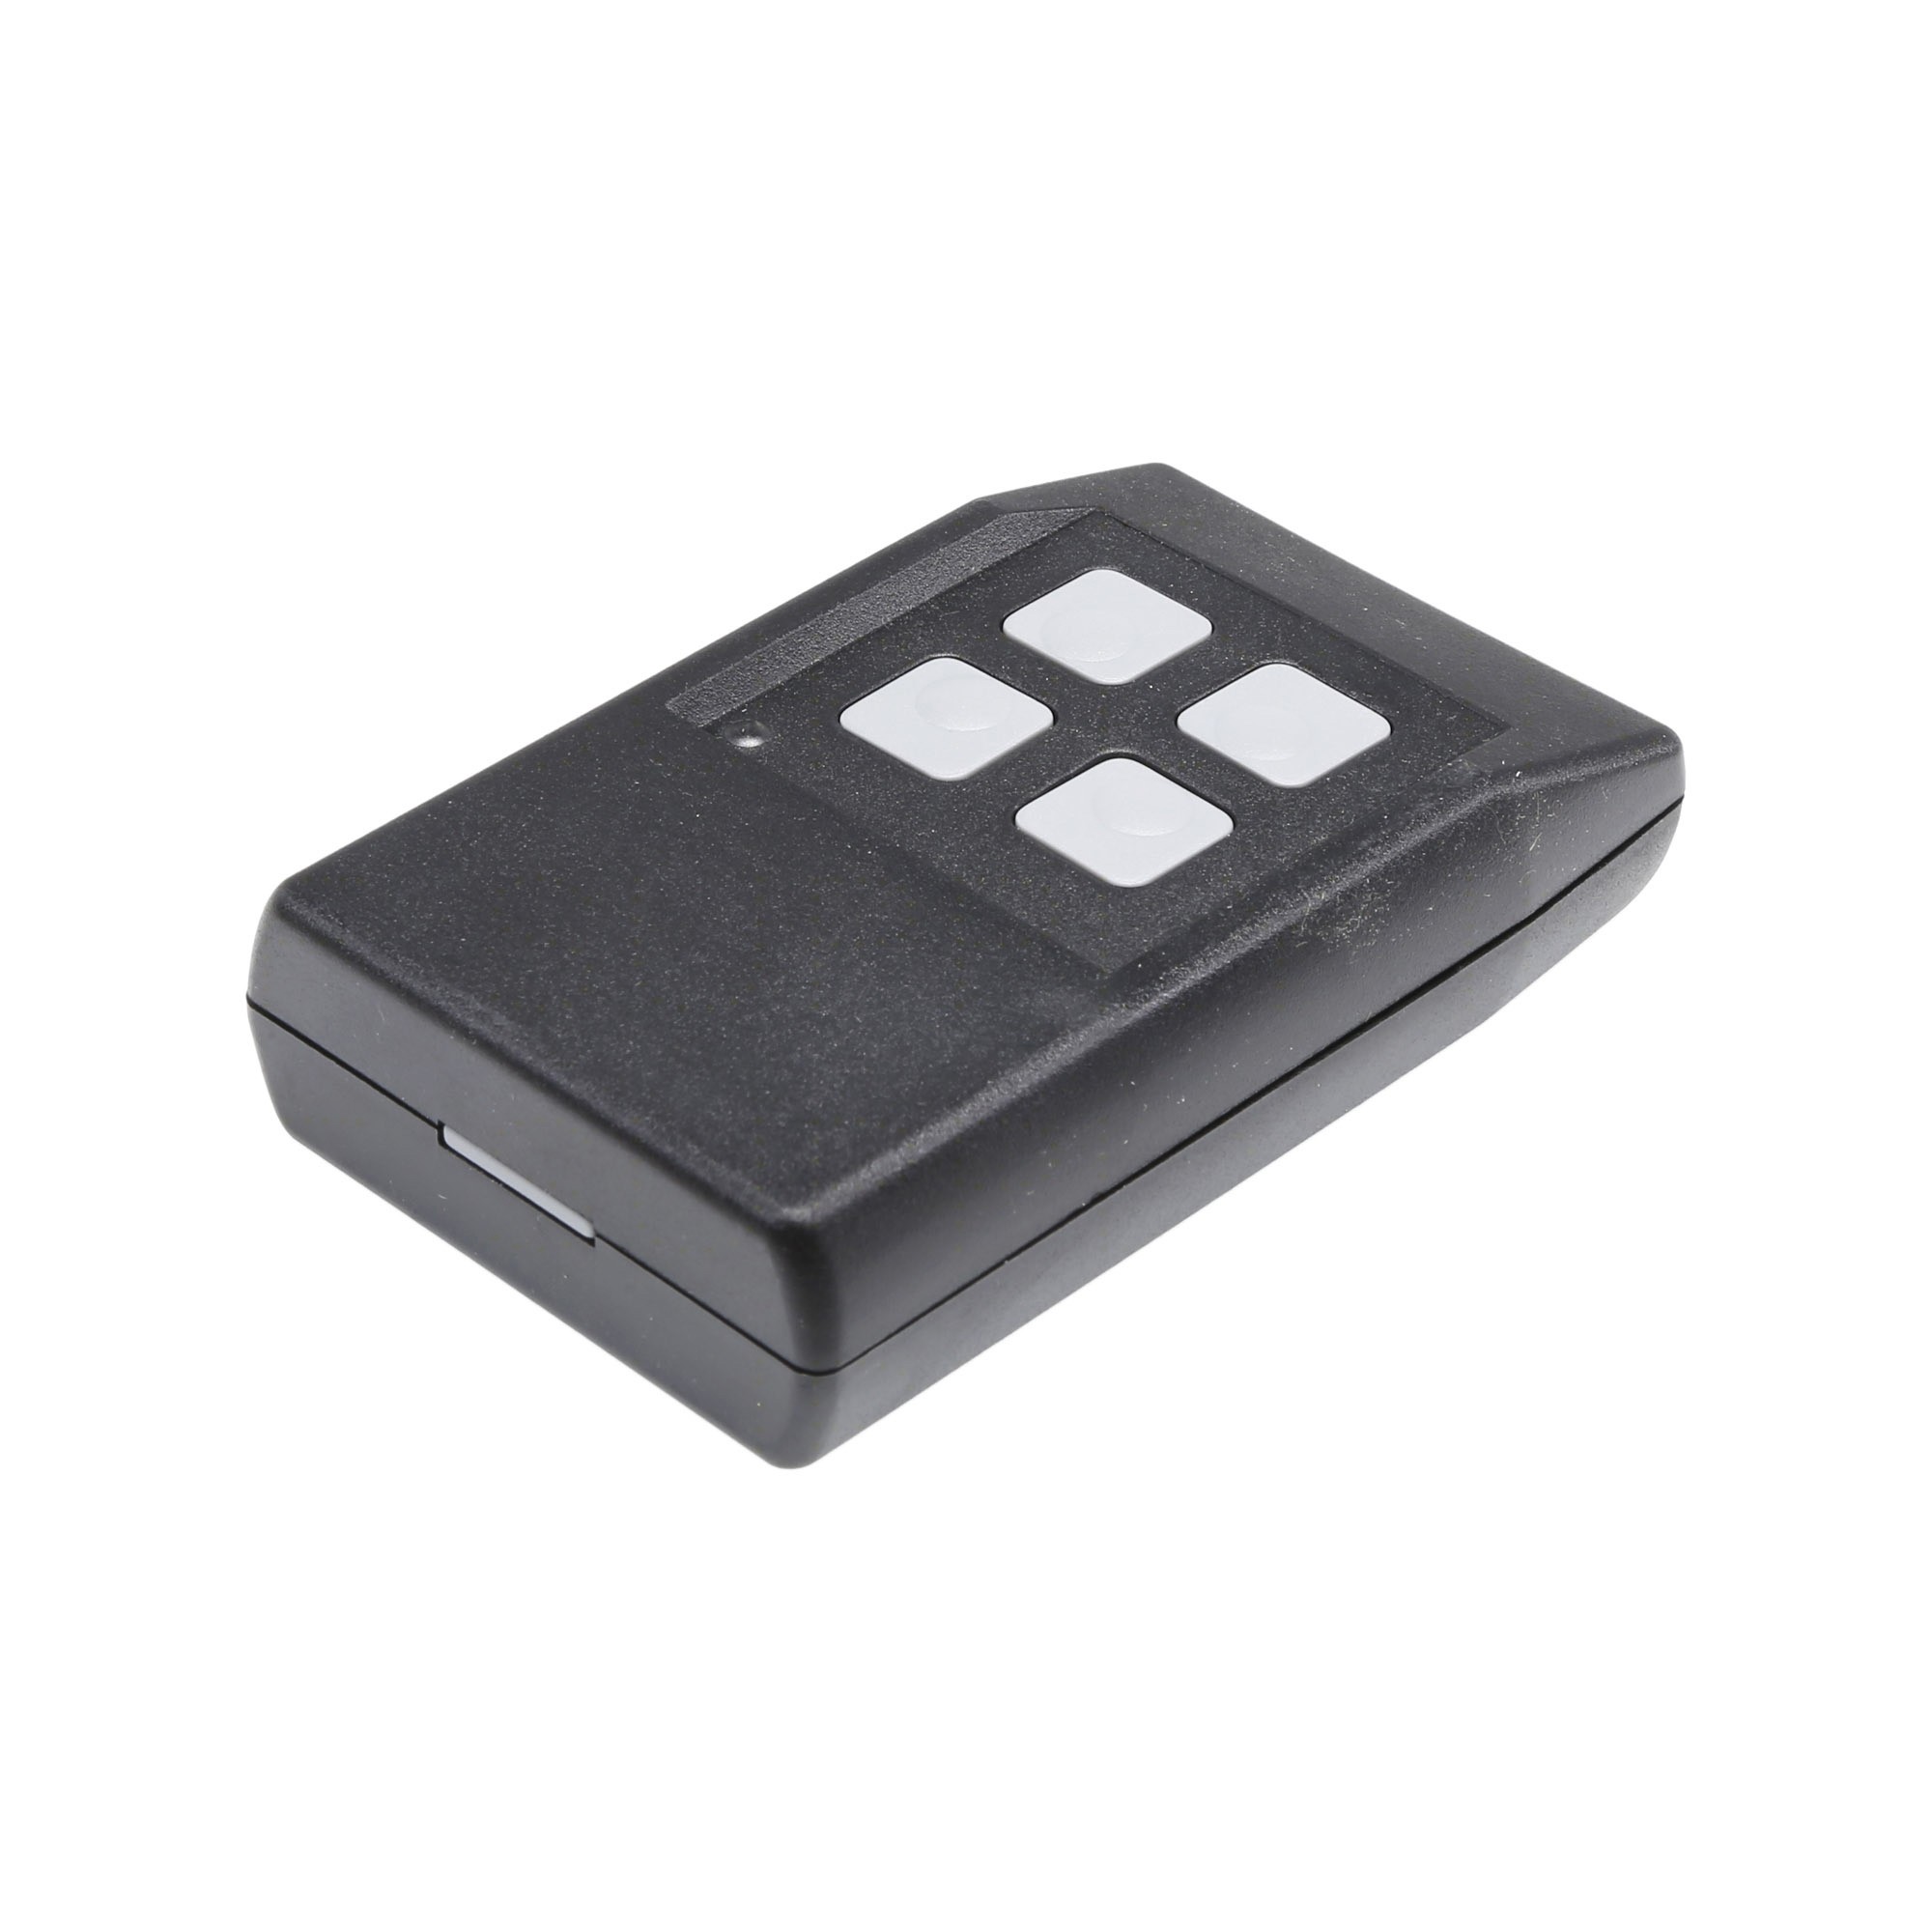 Magnetic AutoControl Transmitter - HS4K01C - Accessories - Parts and Accessories Magnetic Gate Openers